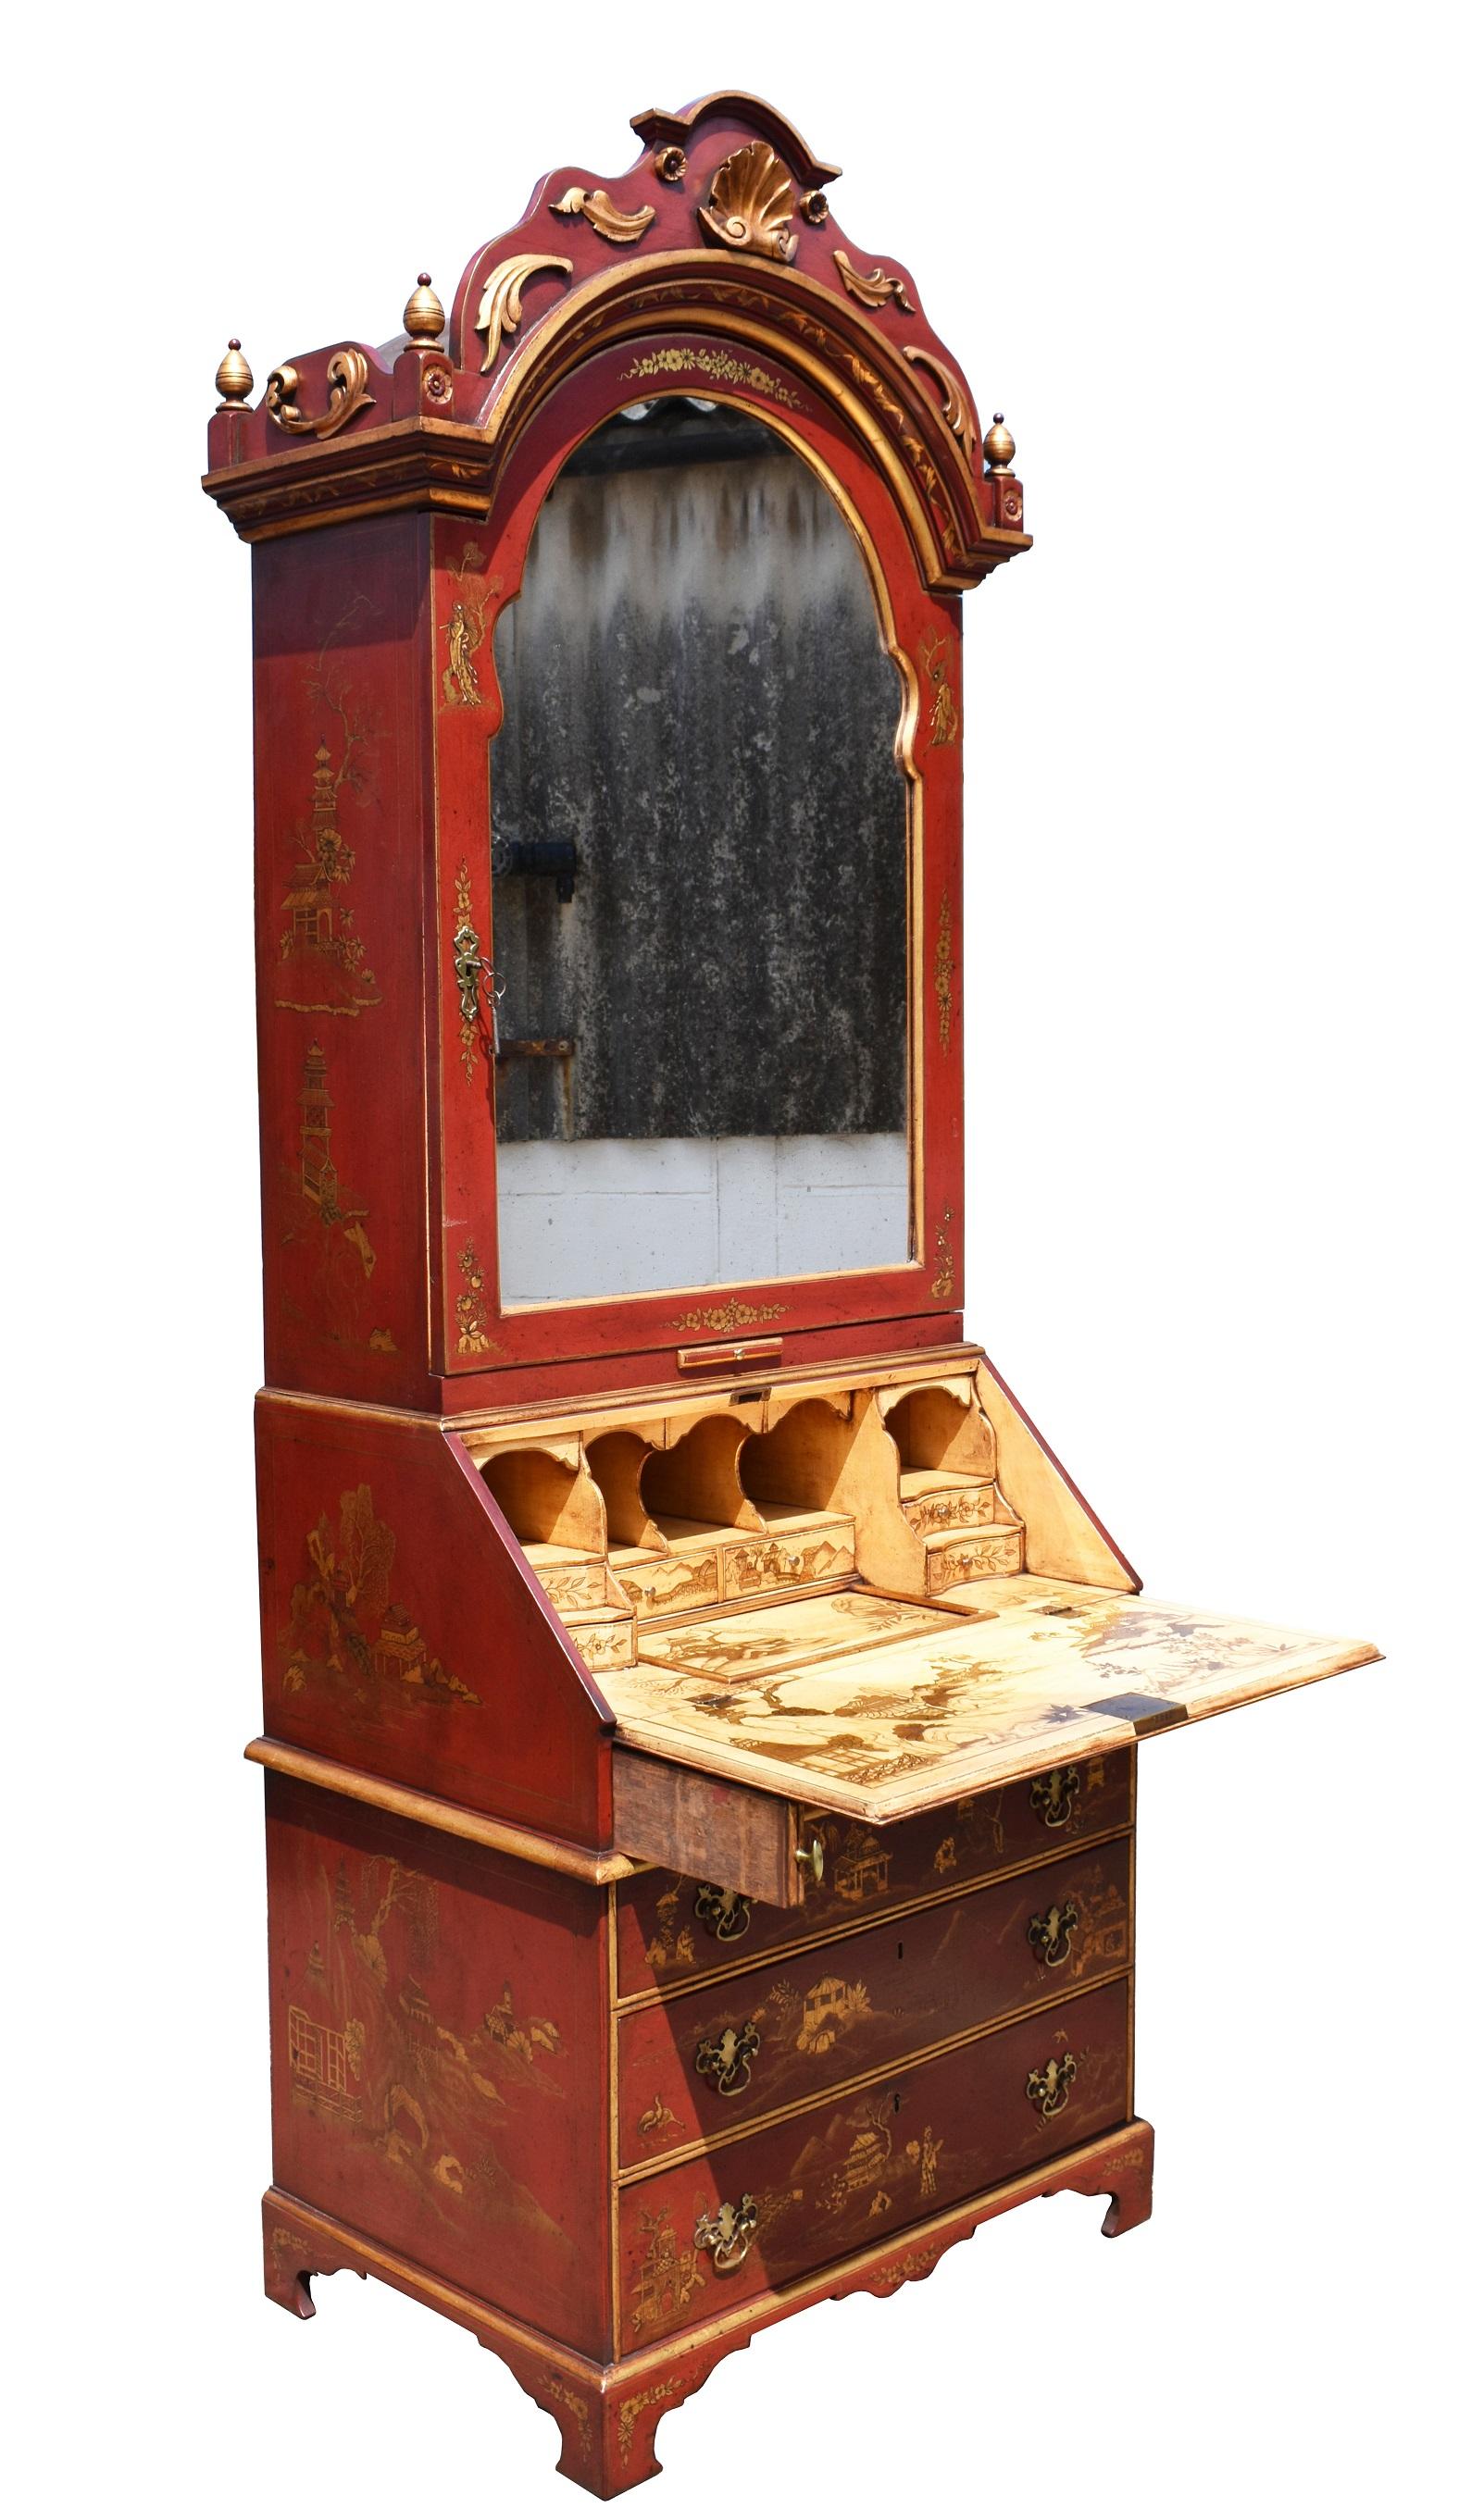 For sale is a good quality 18th century chinoiserie Secretary bookcase. The top of the bookcase has an ornately shaped and carved pediment, above a single arched mirror door, opening to reveal a fully fitted interior which is also profusely